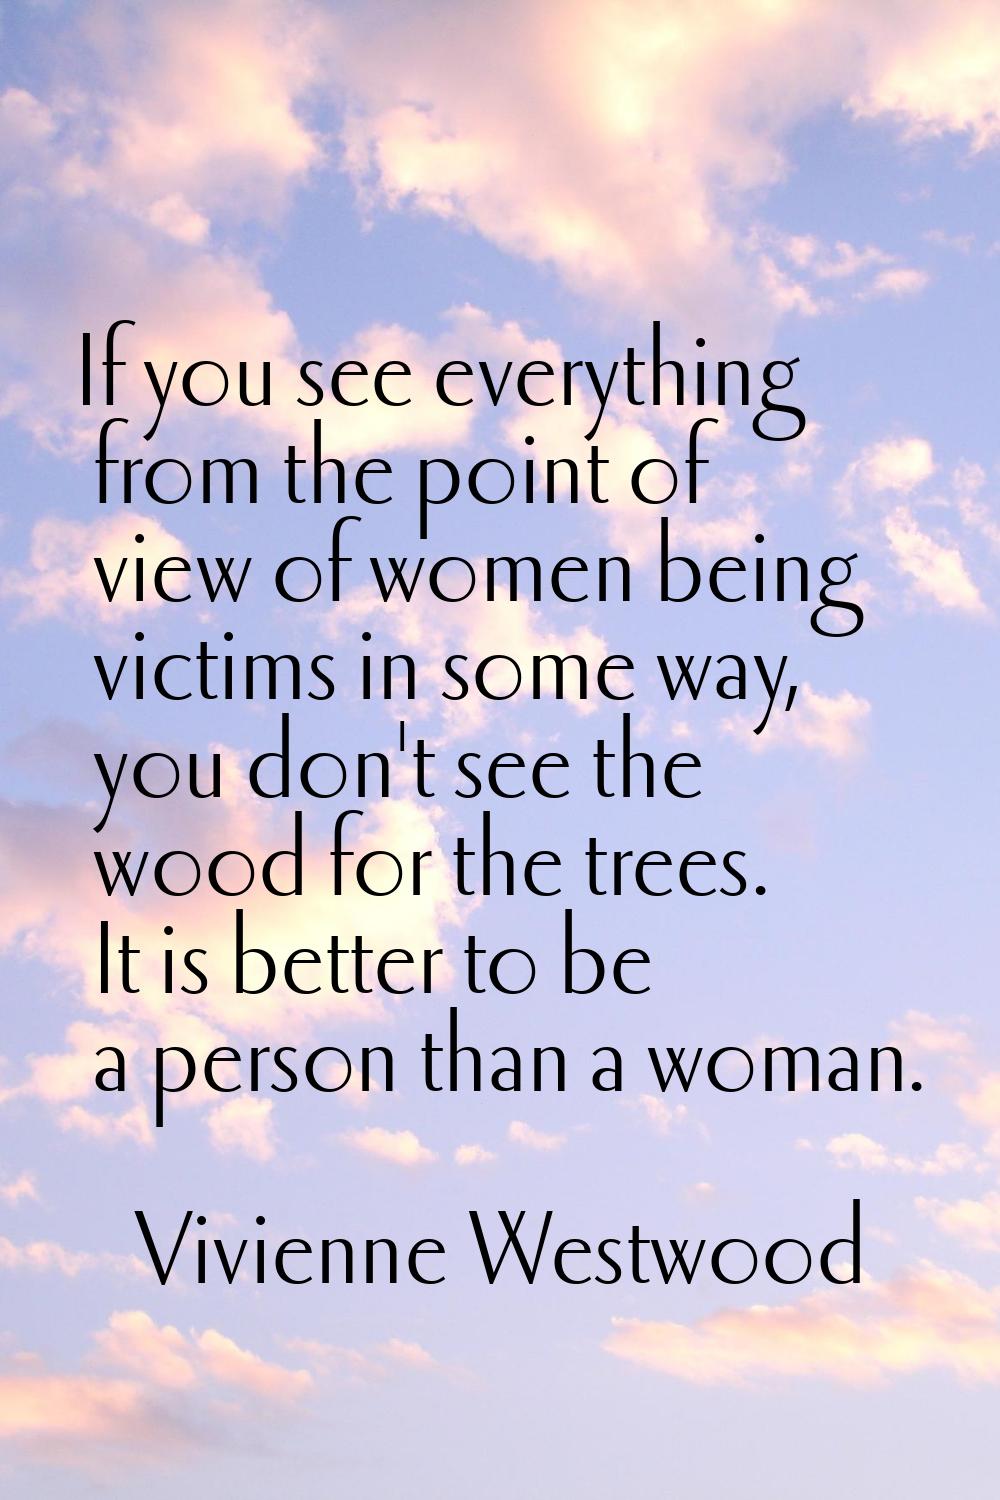 If you see everything from the point of view of women being victims in some way, you don't see the 